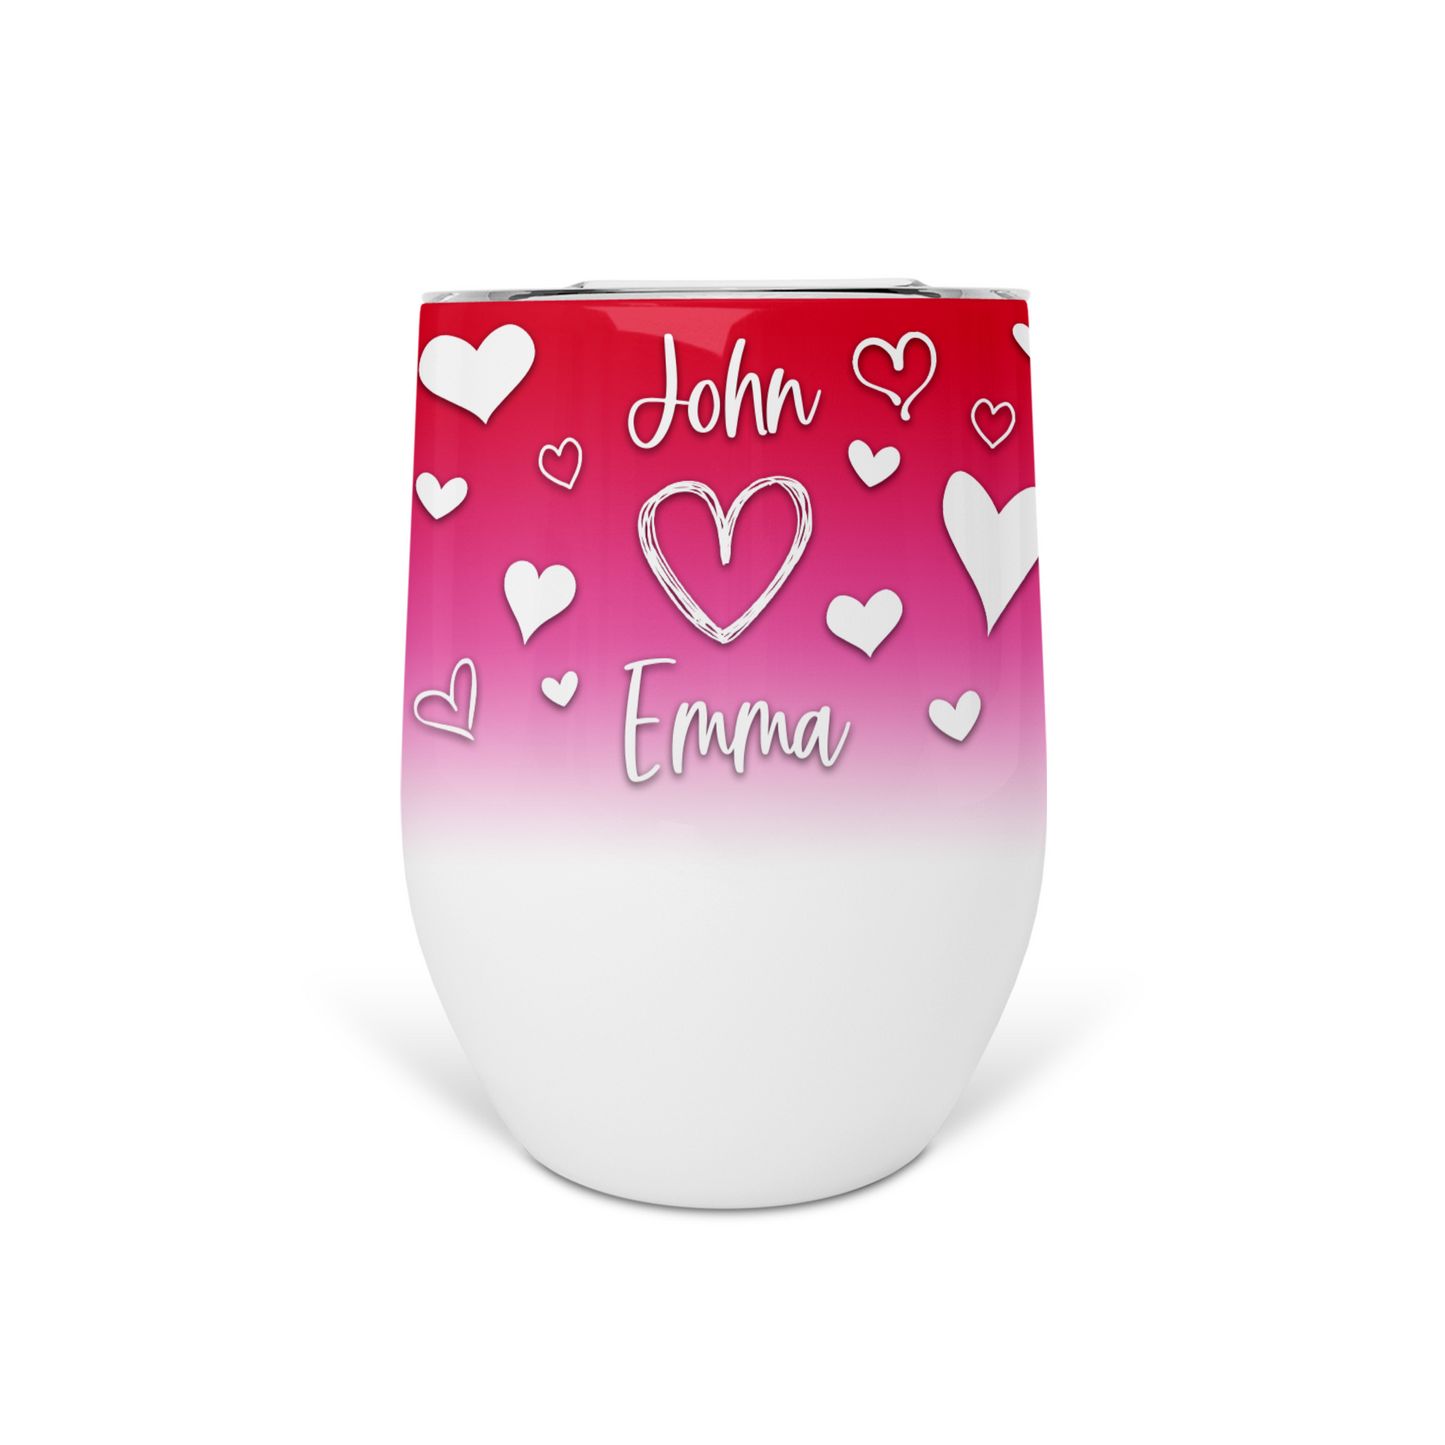 Personalized Valentine's Wine Tumbler With Hearts - WT0017 | S'Berry Boutique